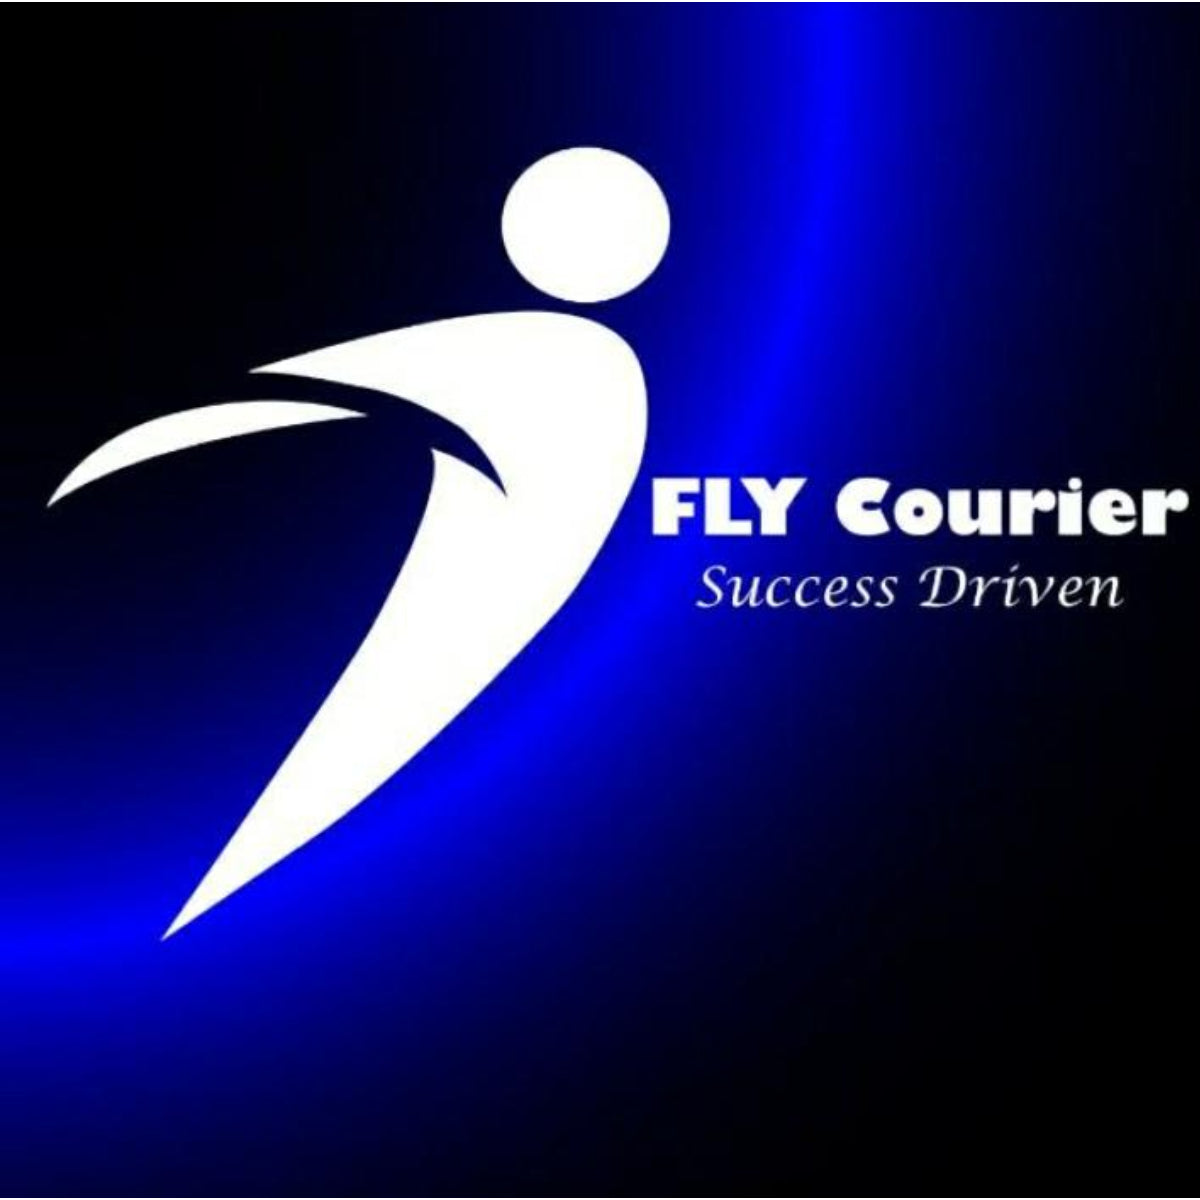 Fly Courier